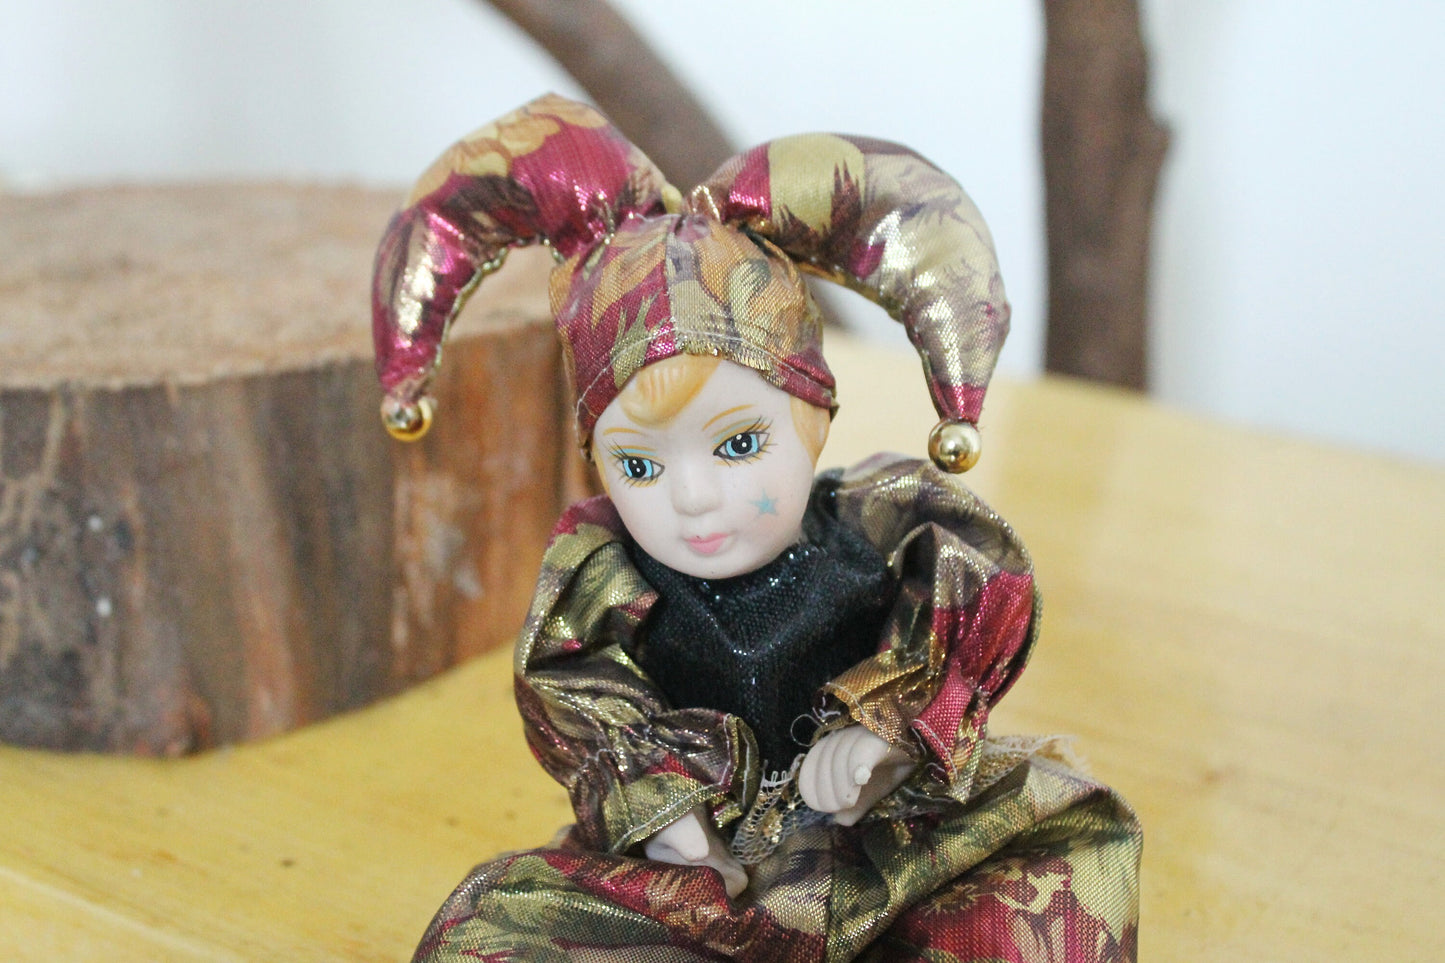 Vintage porcelain Venetian small doll - Harlequin - 9 inches- collectible doll - porcelain doll - decor doll - 1980s